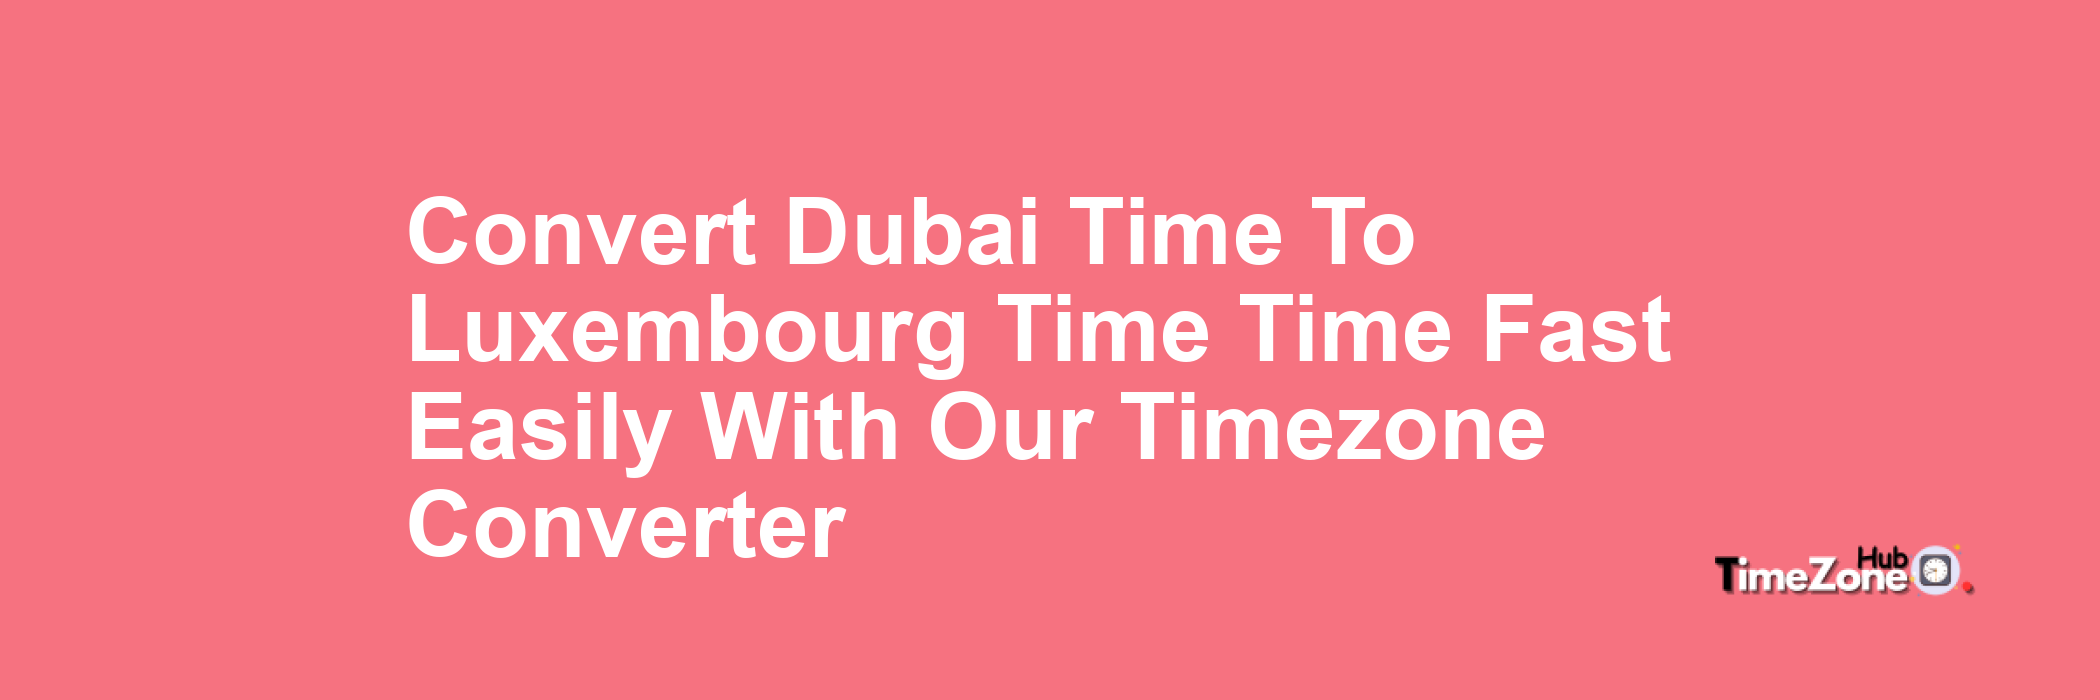 Dubai Time to Luxembourg Time